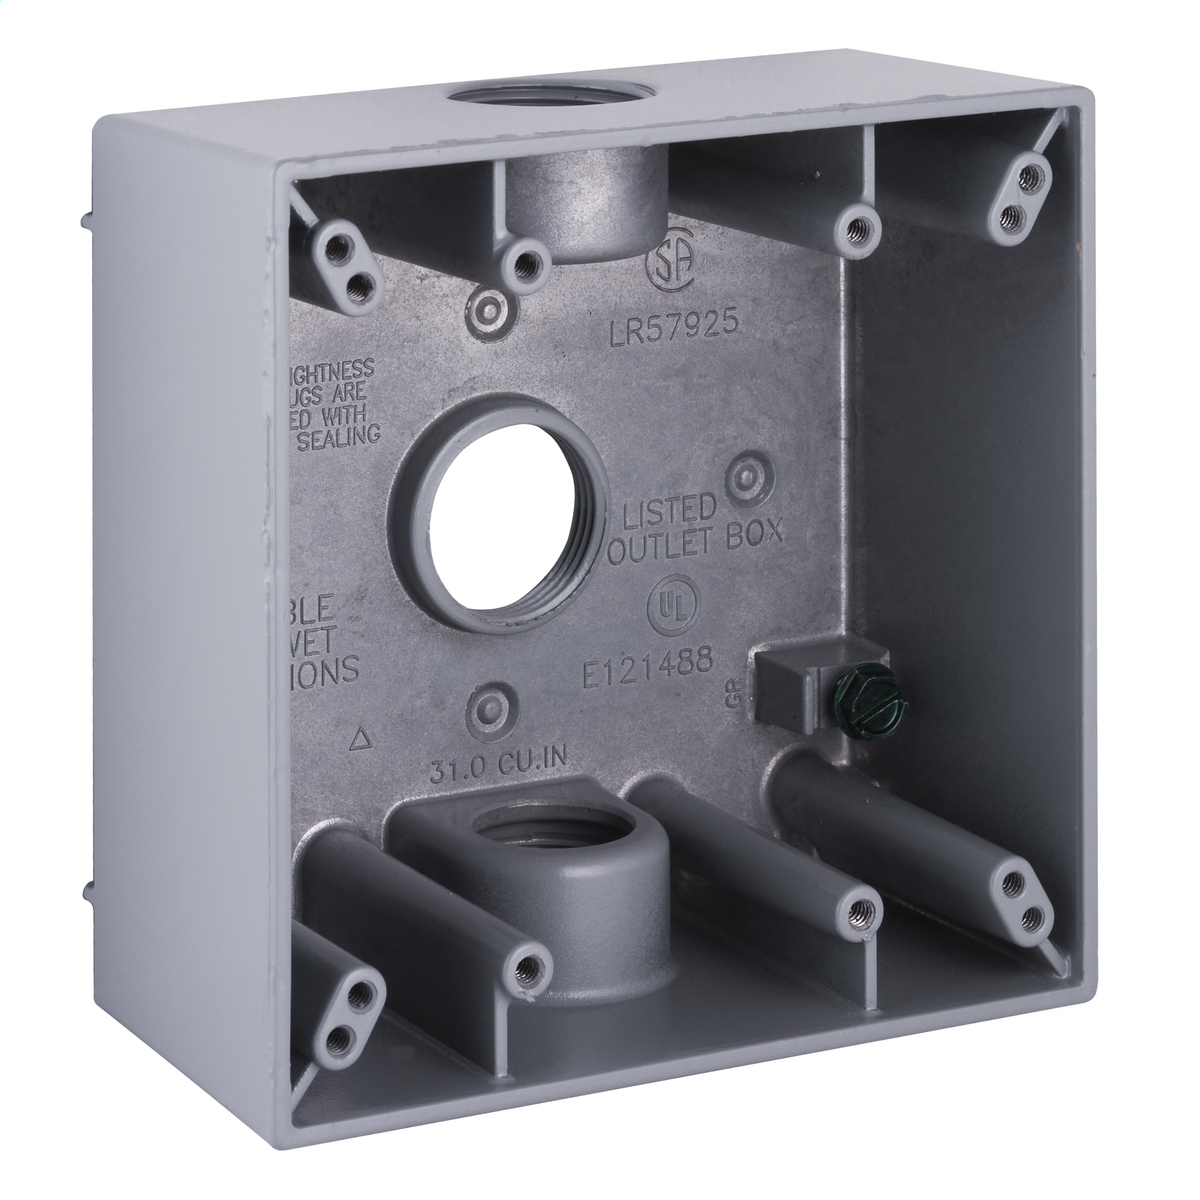 RAC 5341-0 2G WP BOX (3) 3/4 IN. OUTLETS - GRAY